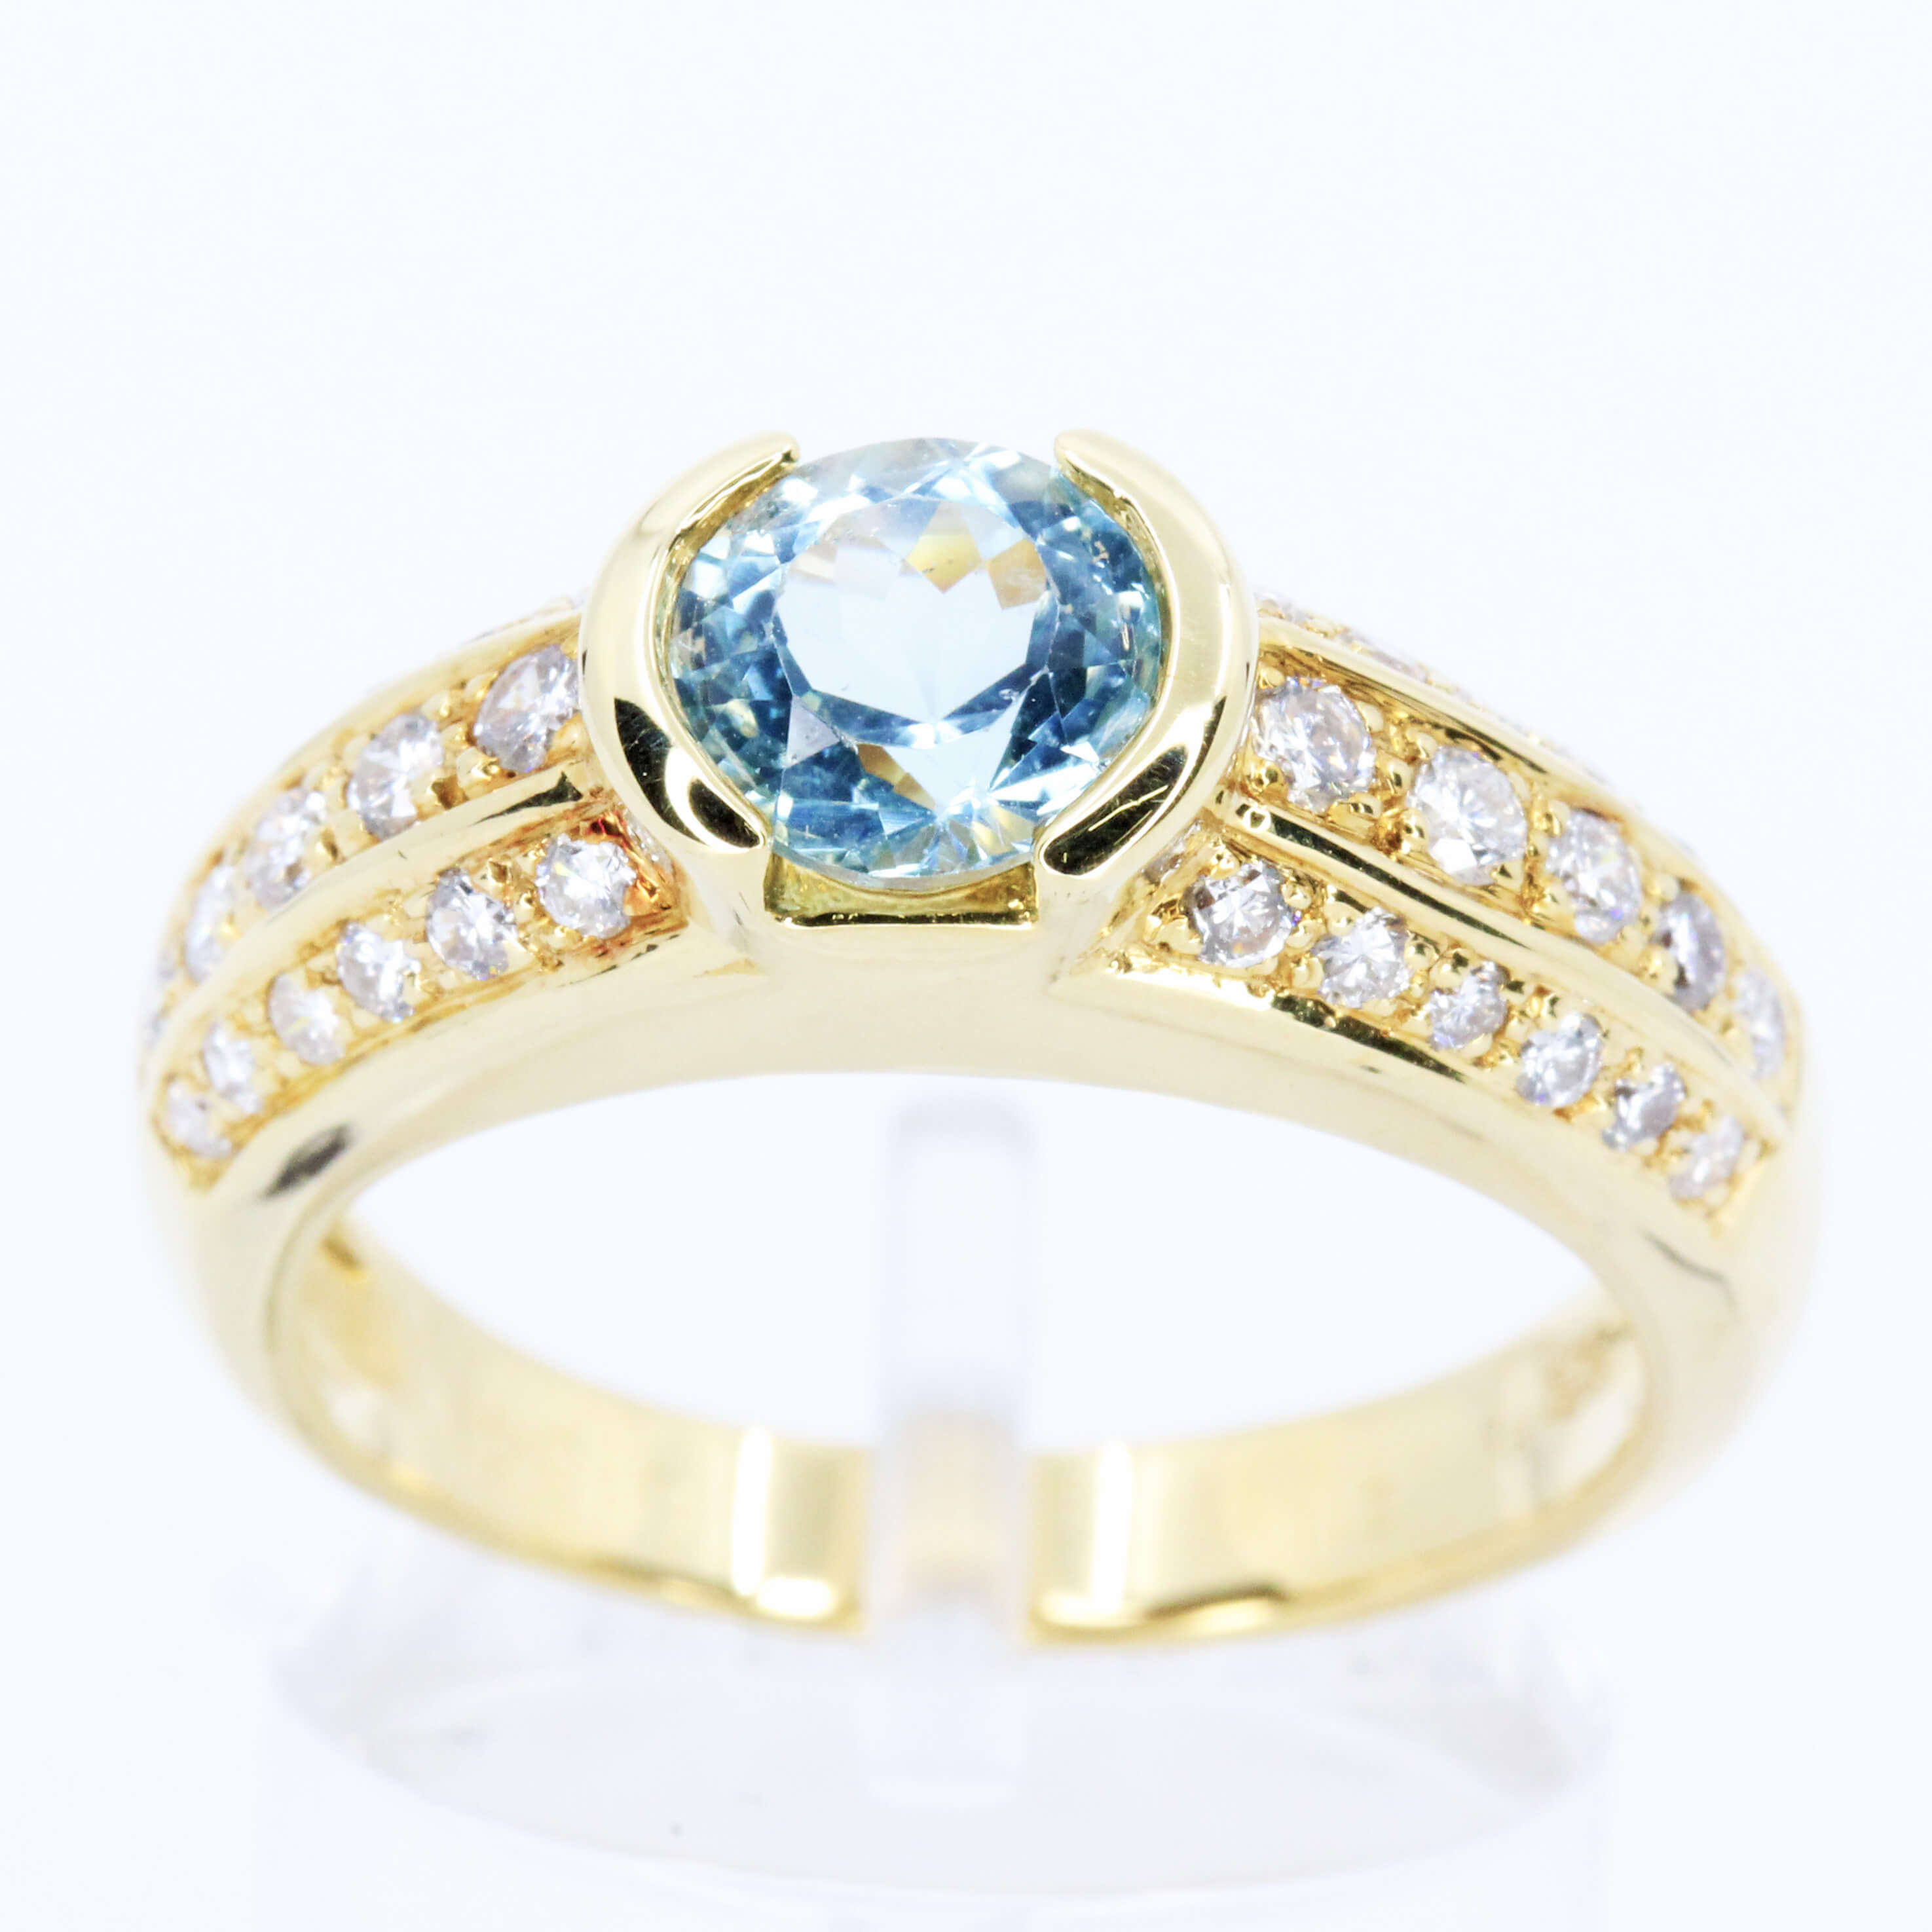 Round Cut Blue Topaz Ring with Accents of Diamonds Set in